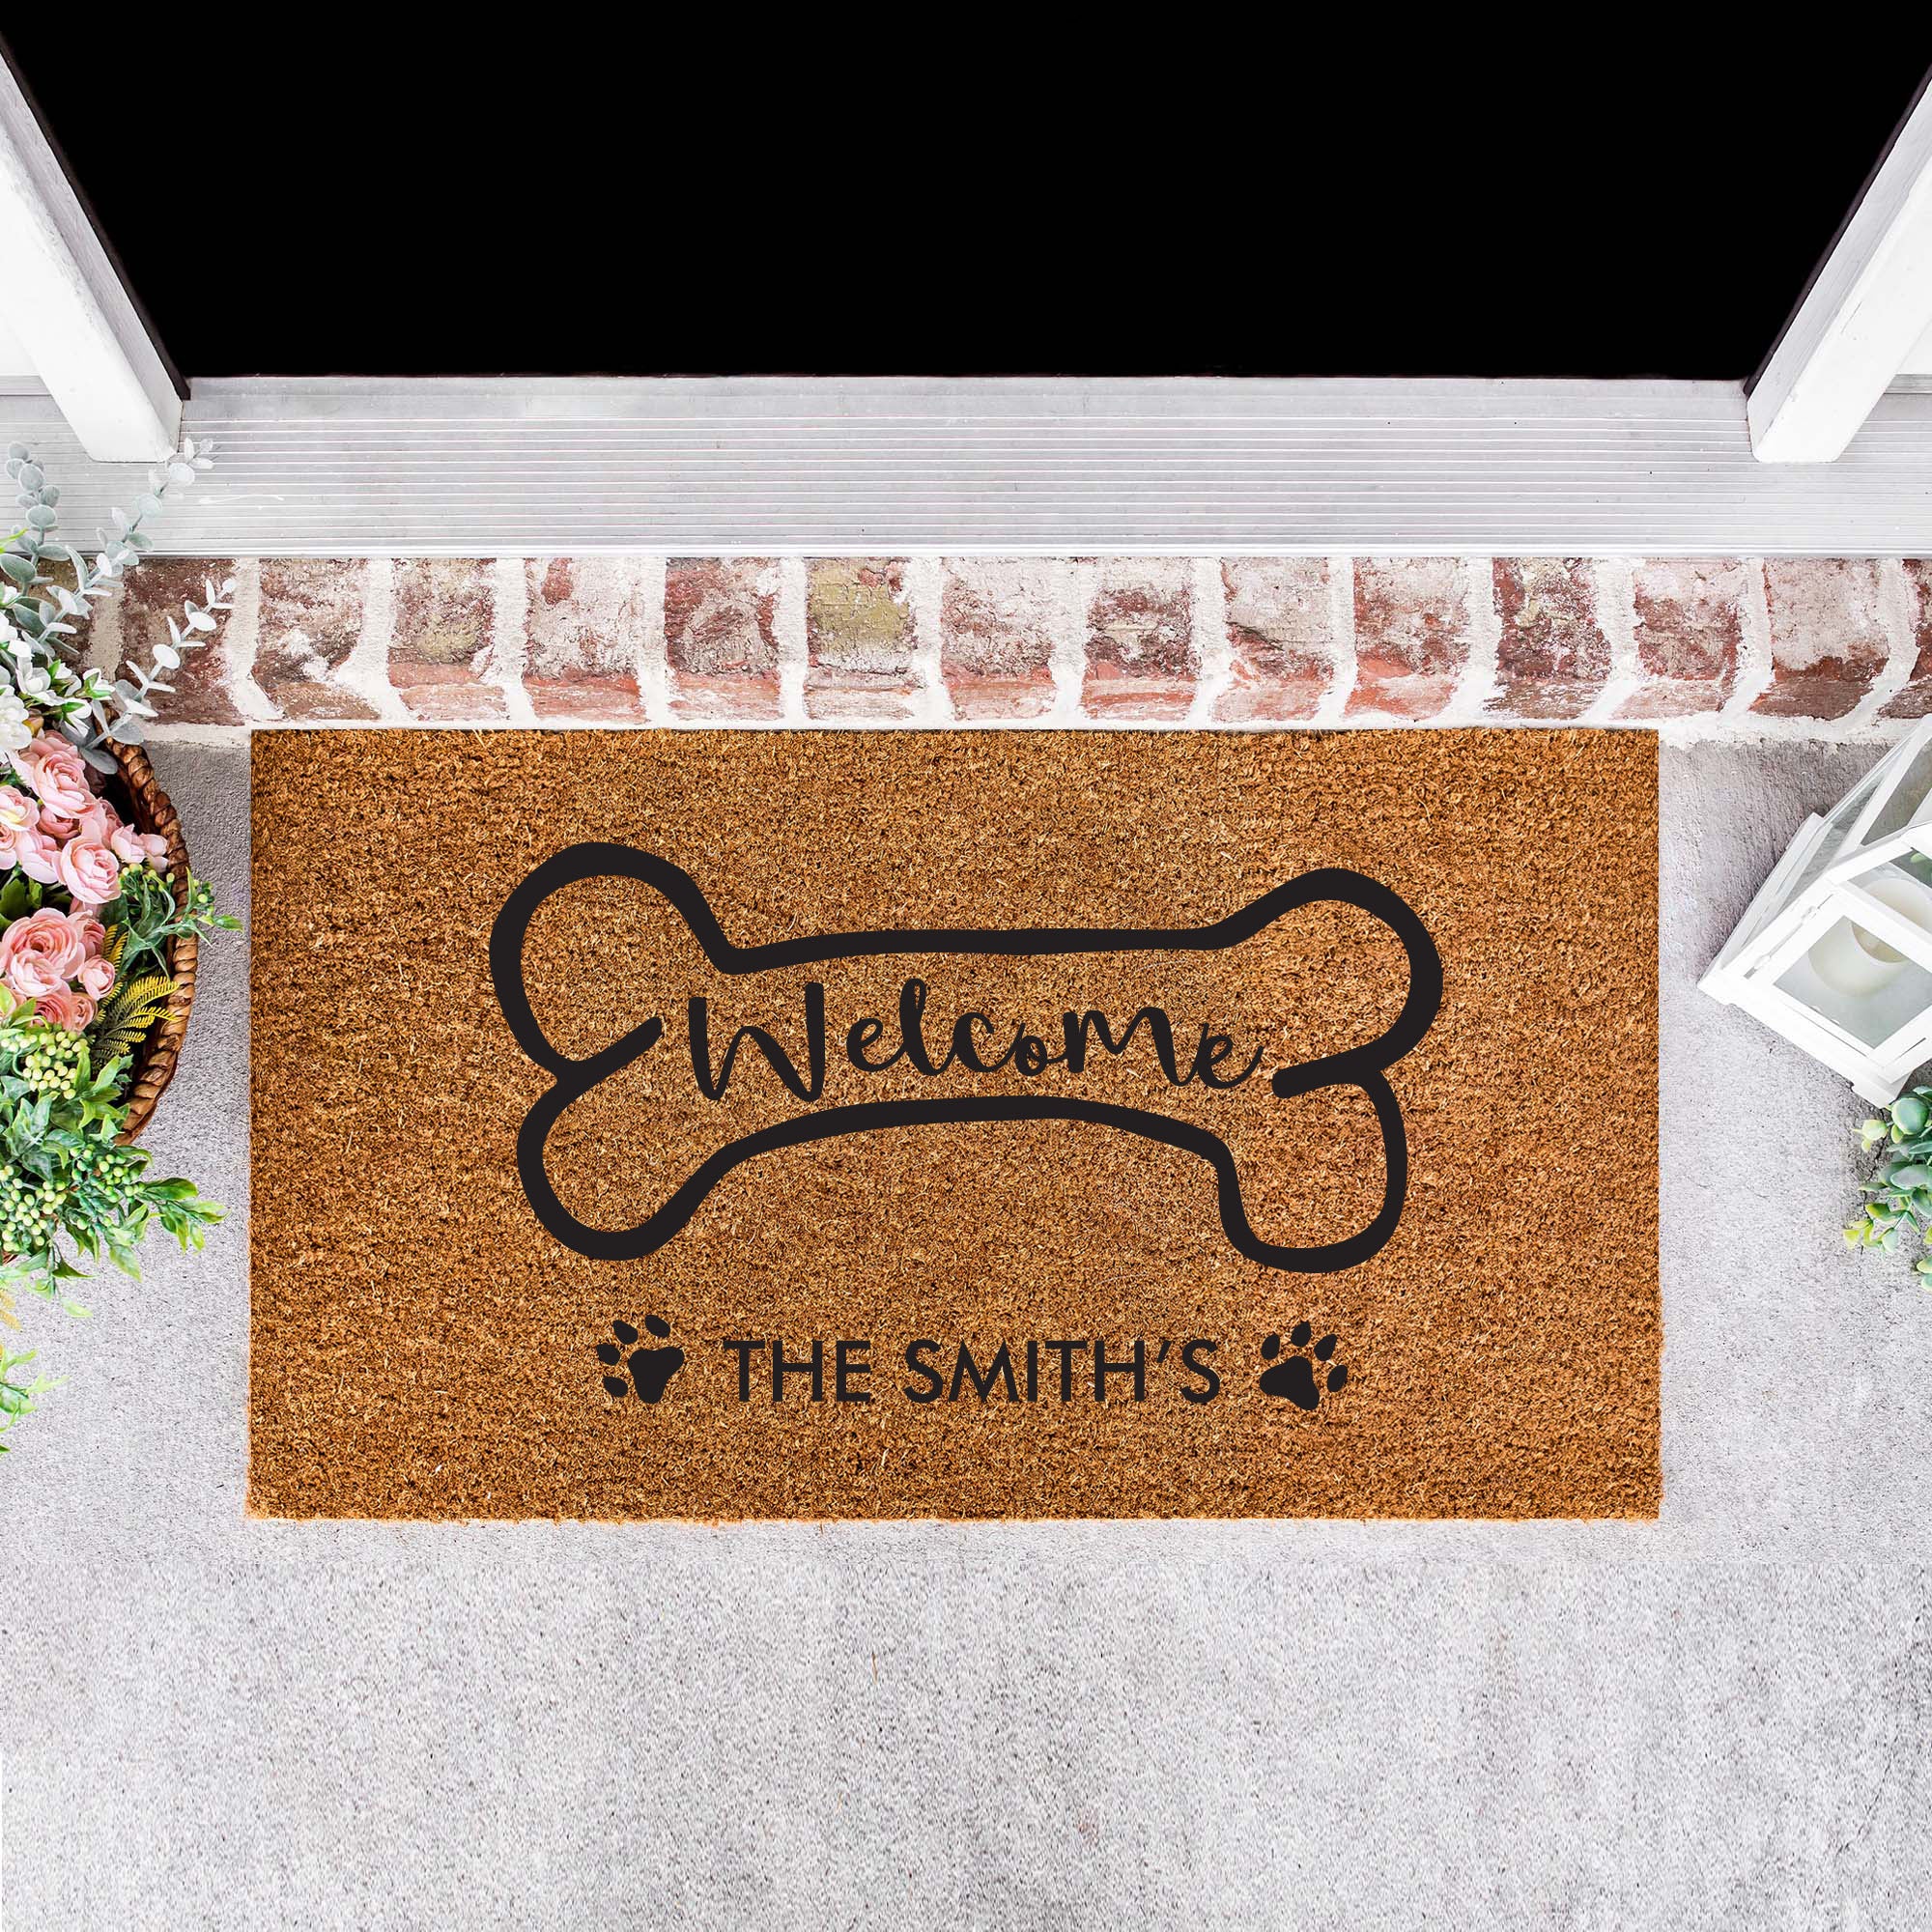 Personalised Doormat with dog bone and paw-Welcome Door Mat-New Home Gift, Customised Doormat-Personalised Gift-Housewarming Gift-Bride Gift